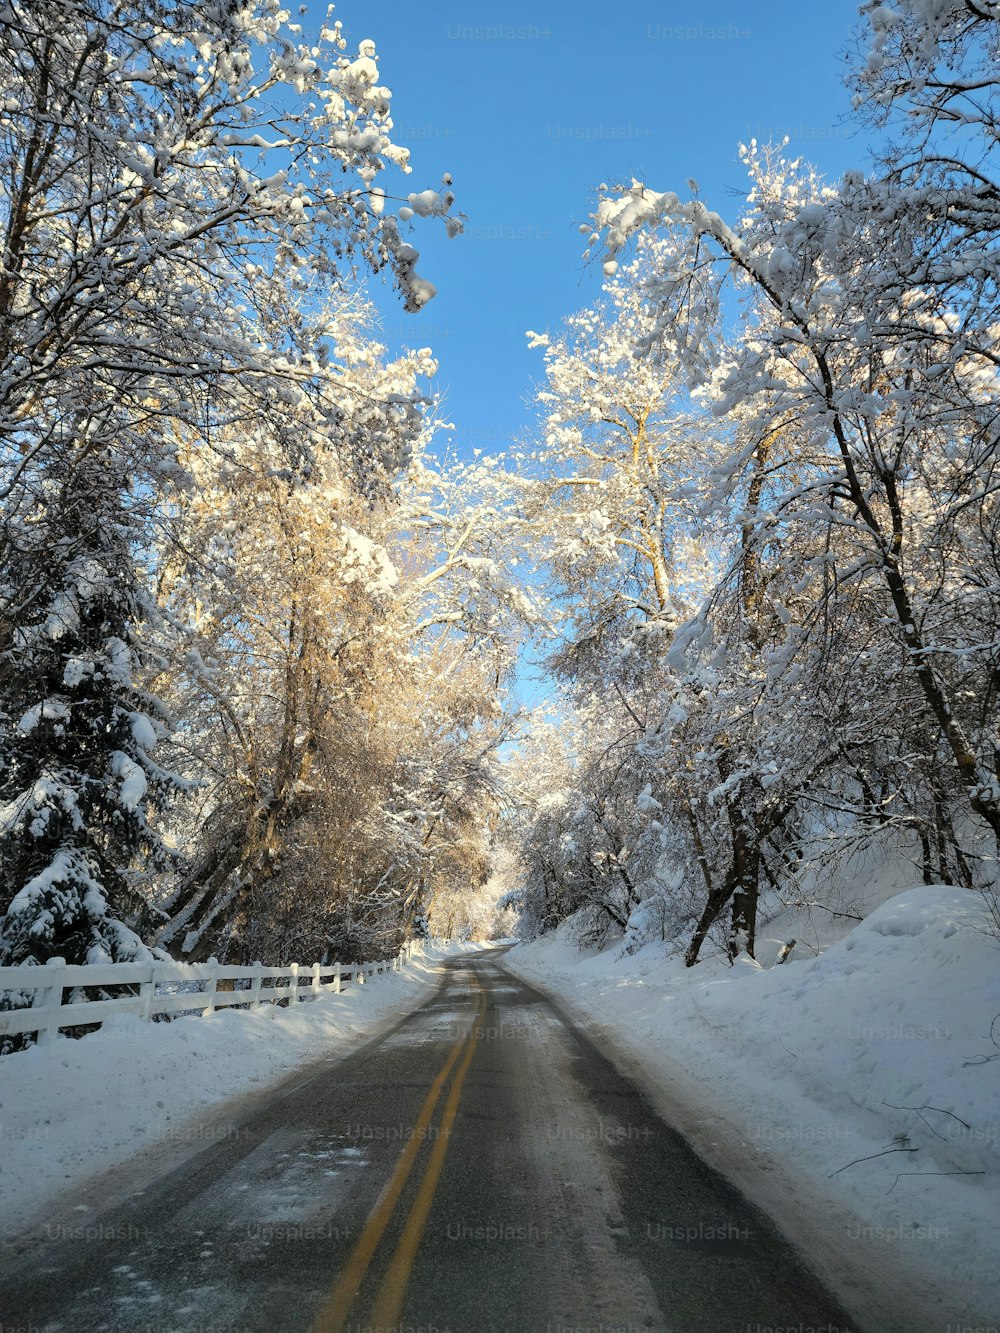 a road with snow on the ground and trees on both sides